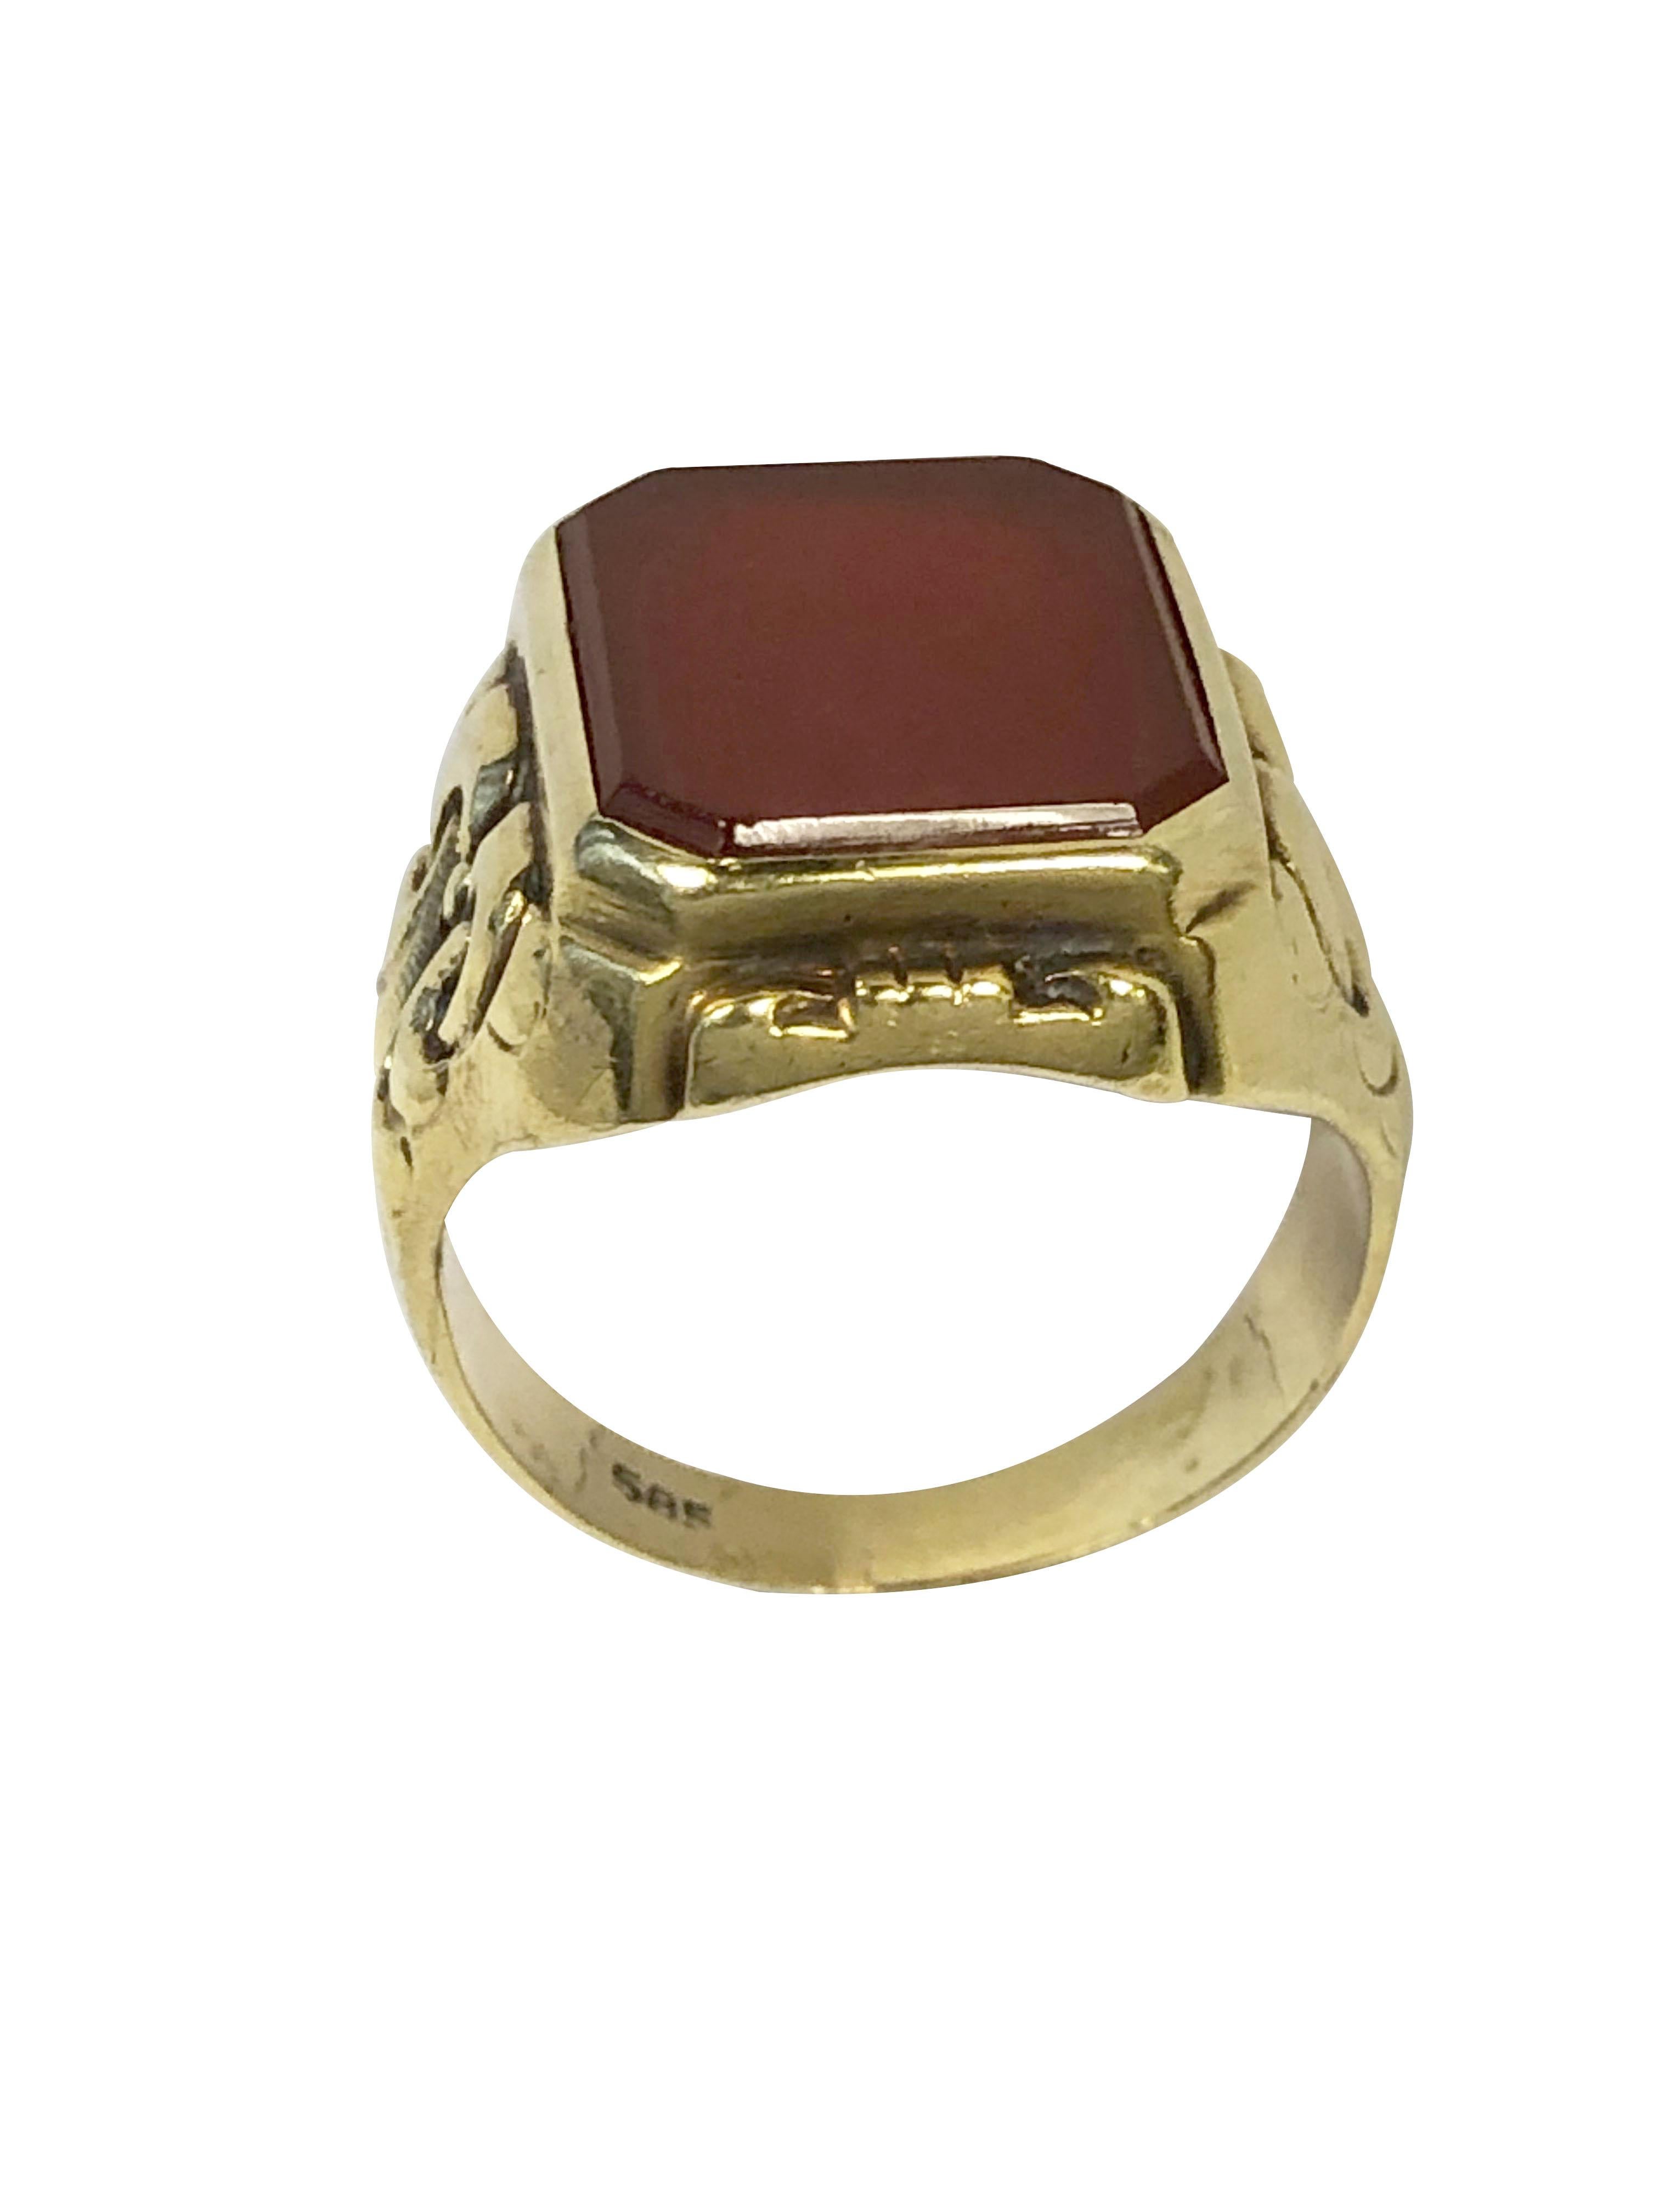 Cabochon Antique Gold and Carnelian Edwardian Signet Ring 